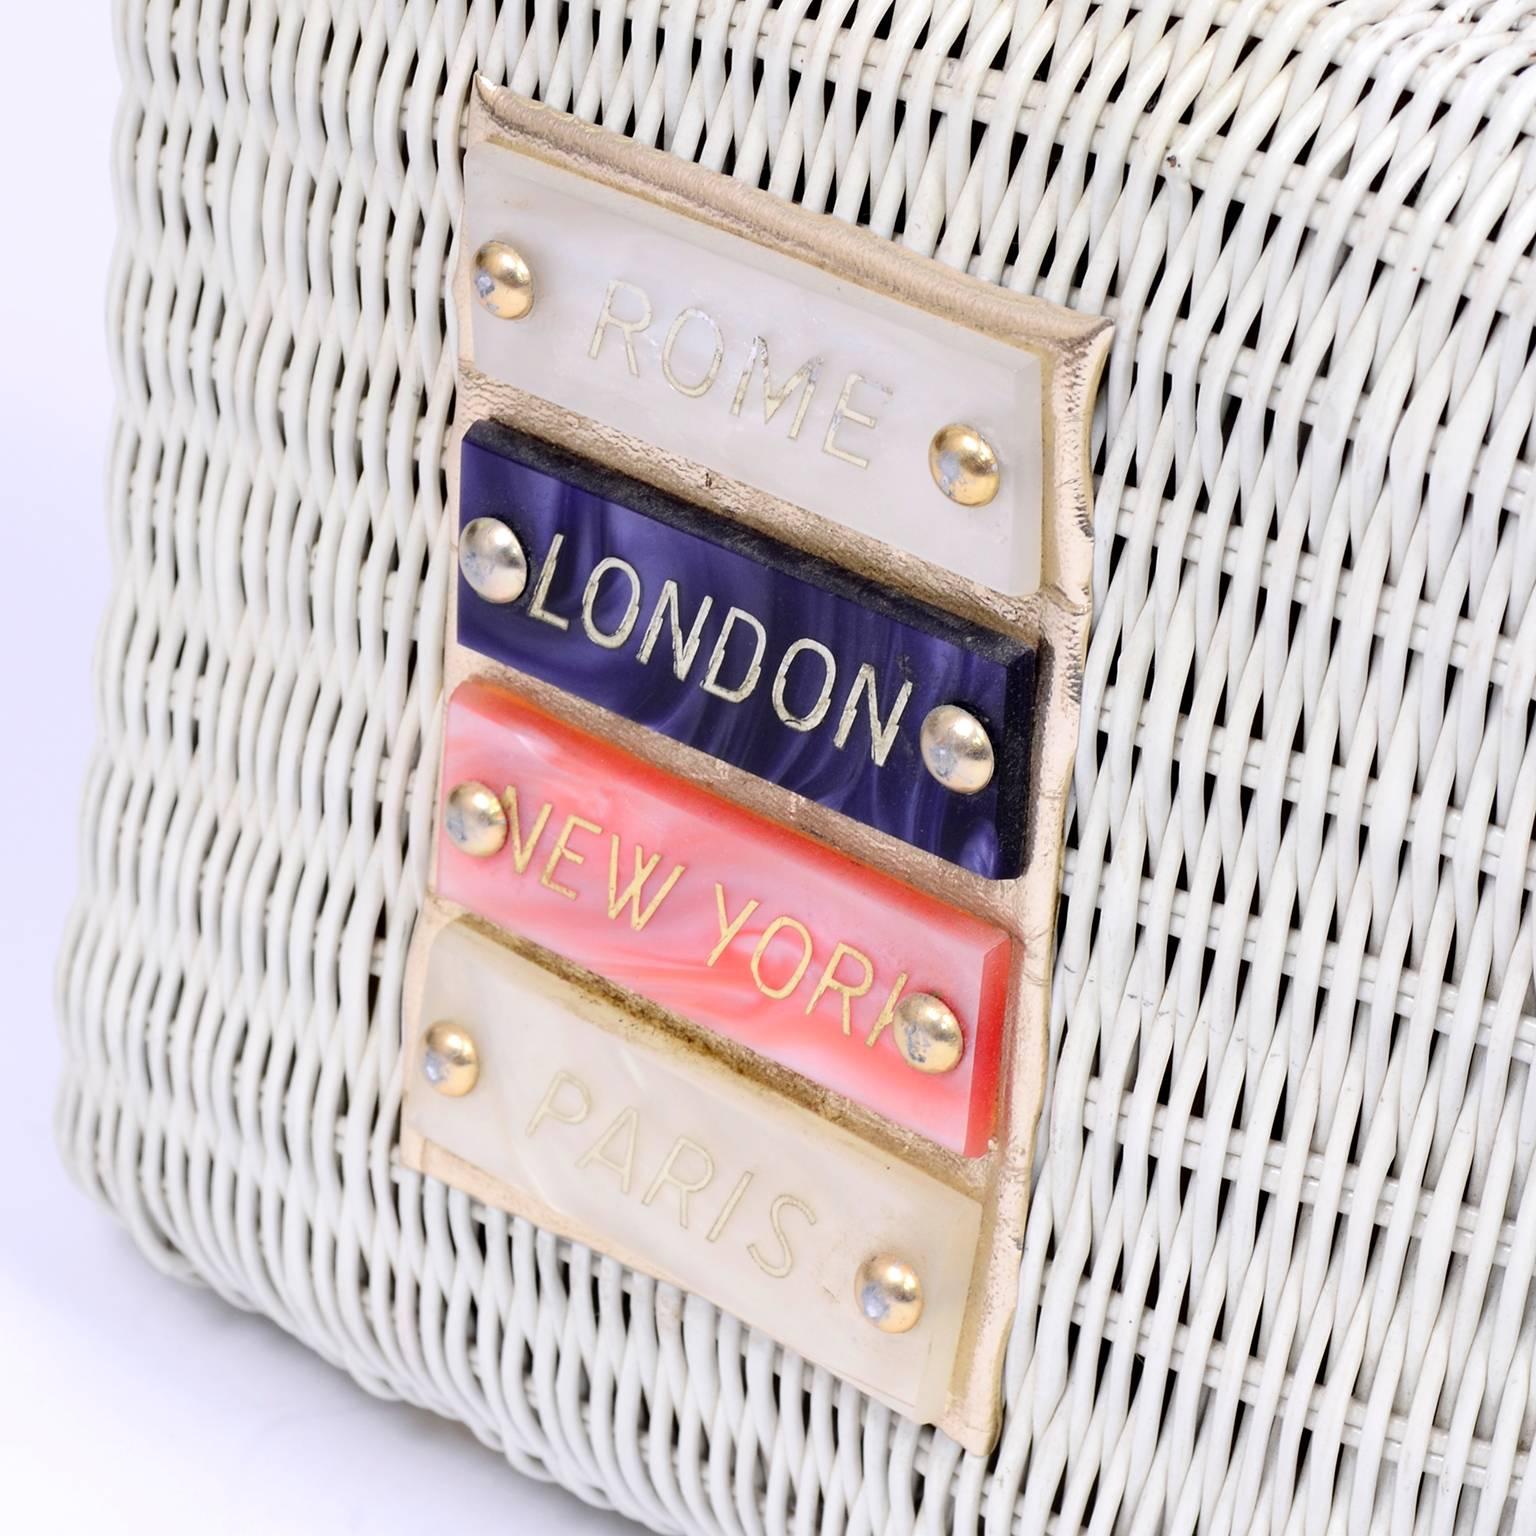 This is a rare mid century vintage ivory wicker handbag with famous city names on the front on lucite plaques including; Rome, London, New York and Paris.  This unique novelty handbag was hand made by Du-Val in Hong Kong in the 1960's. The inside is